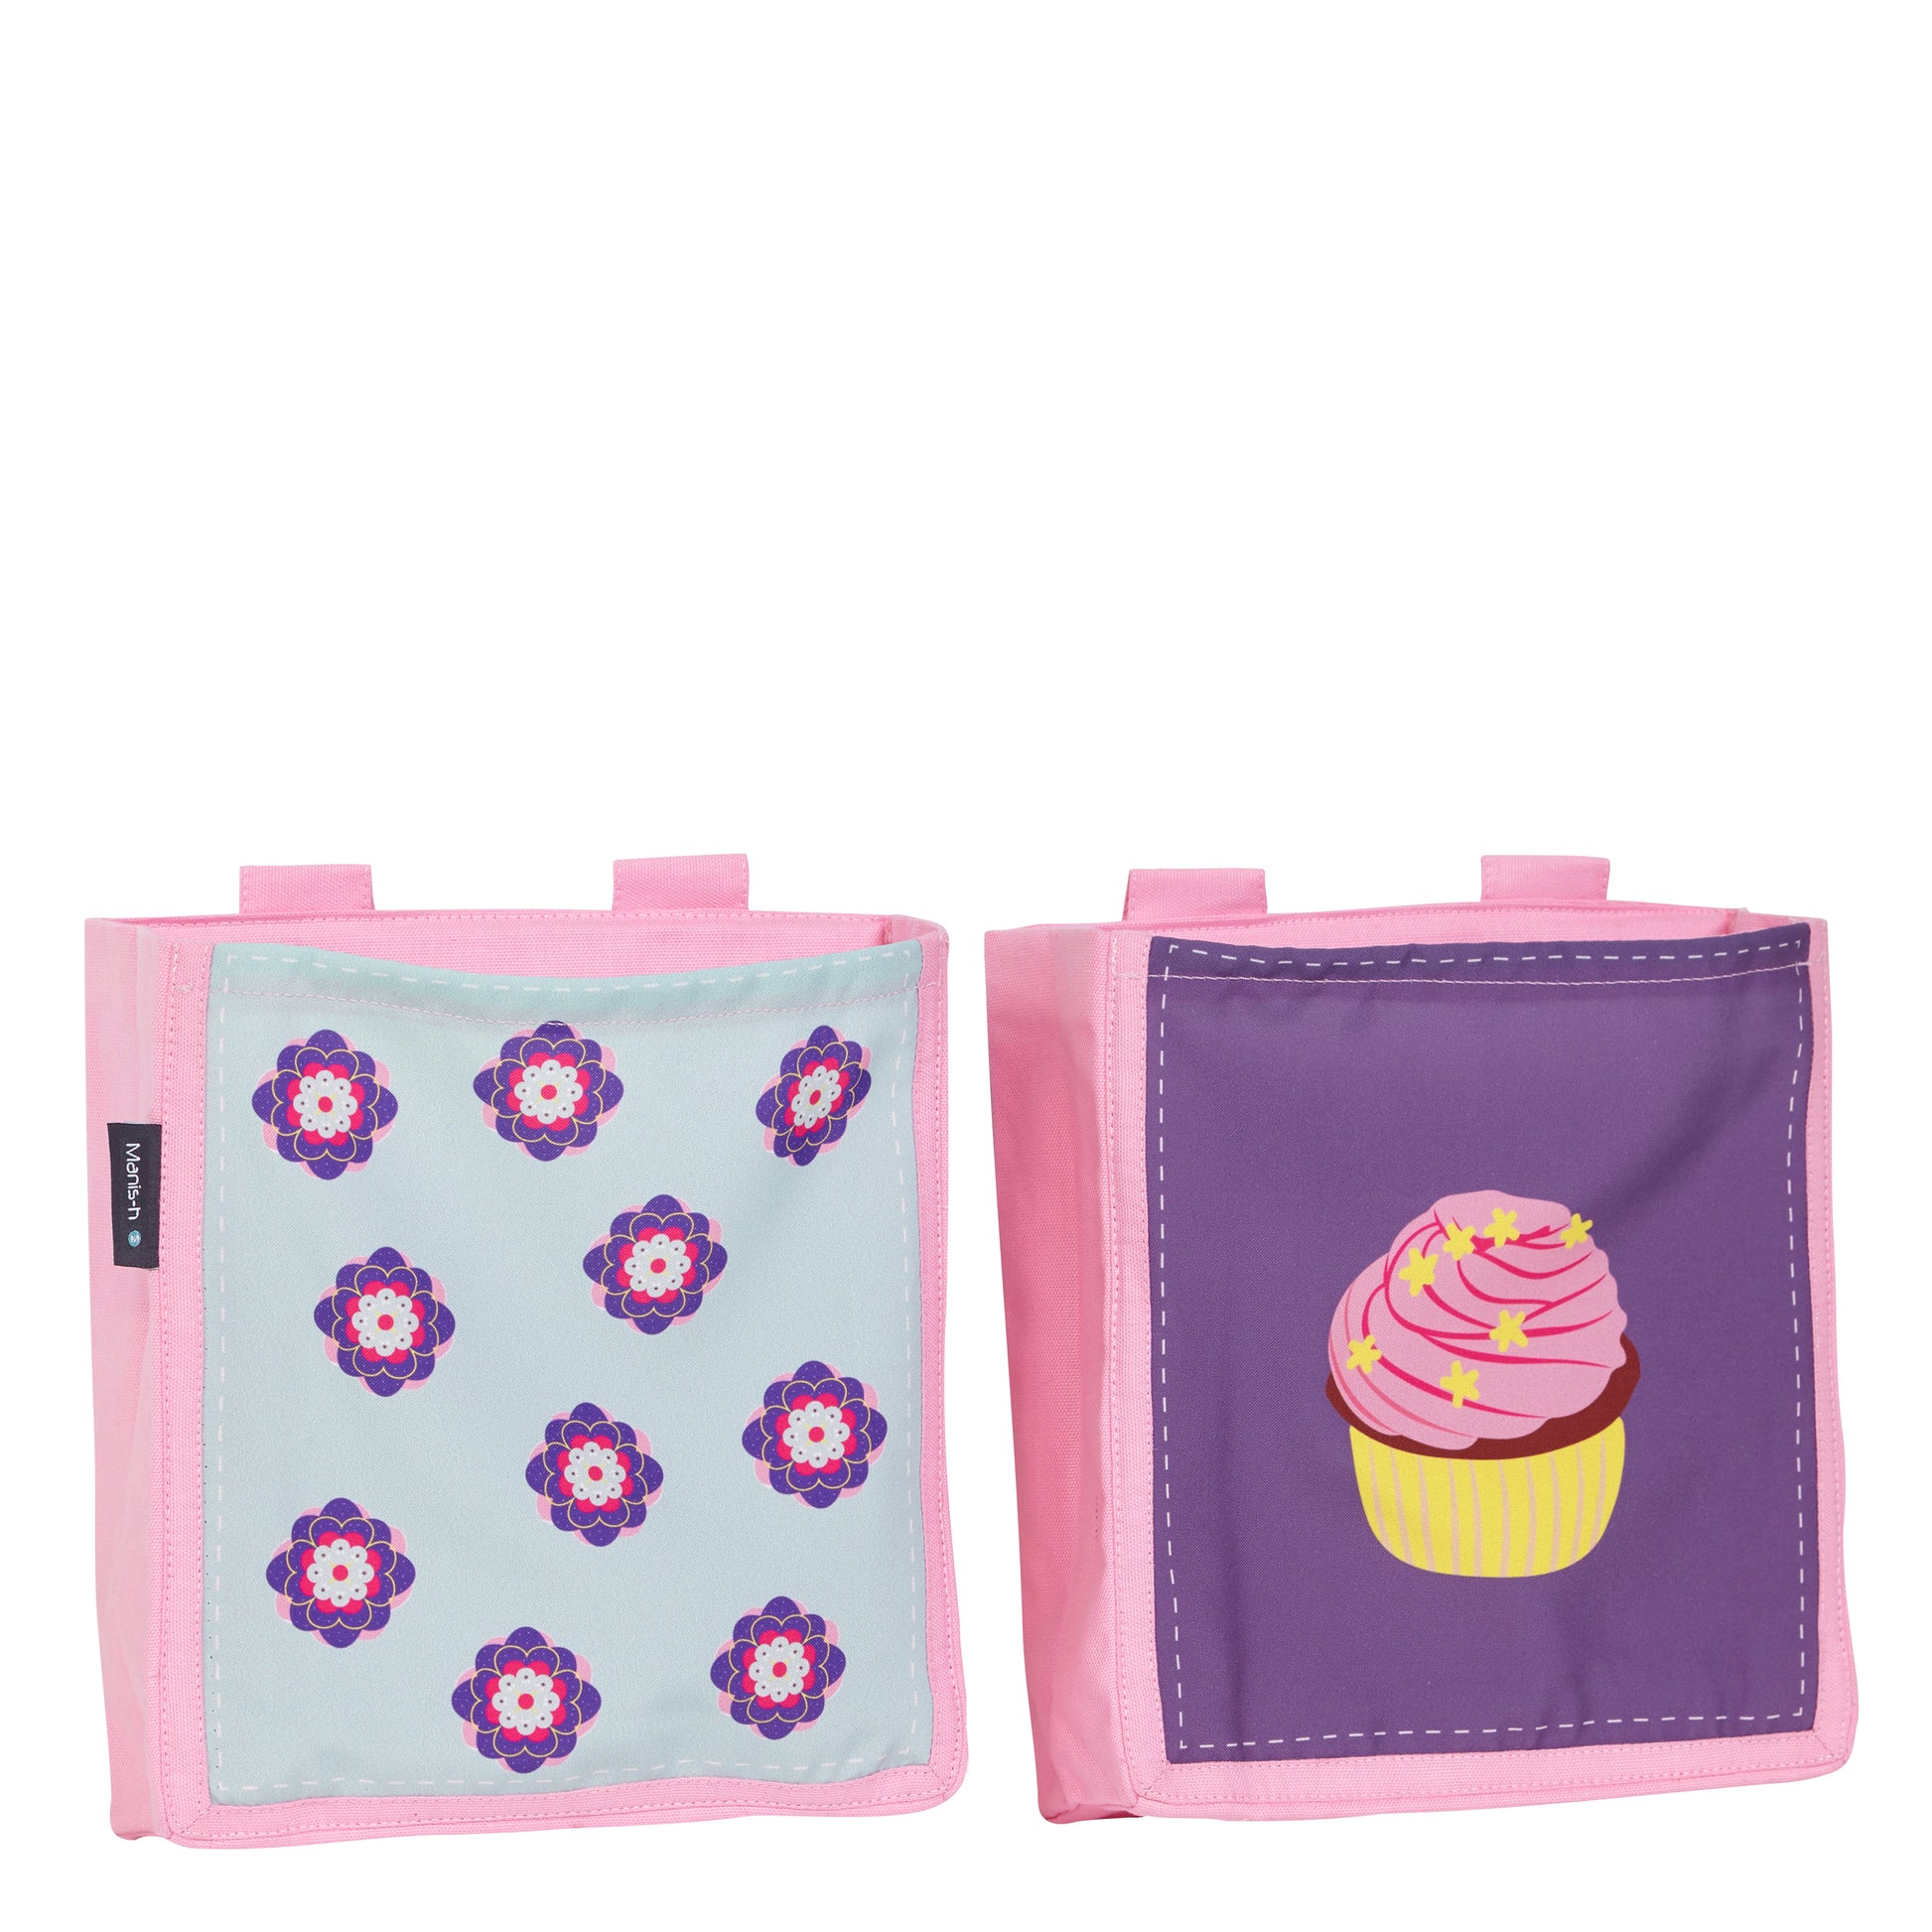 Manis-h  2 Bed Pockets in a Cup cake & Flower Design